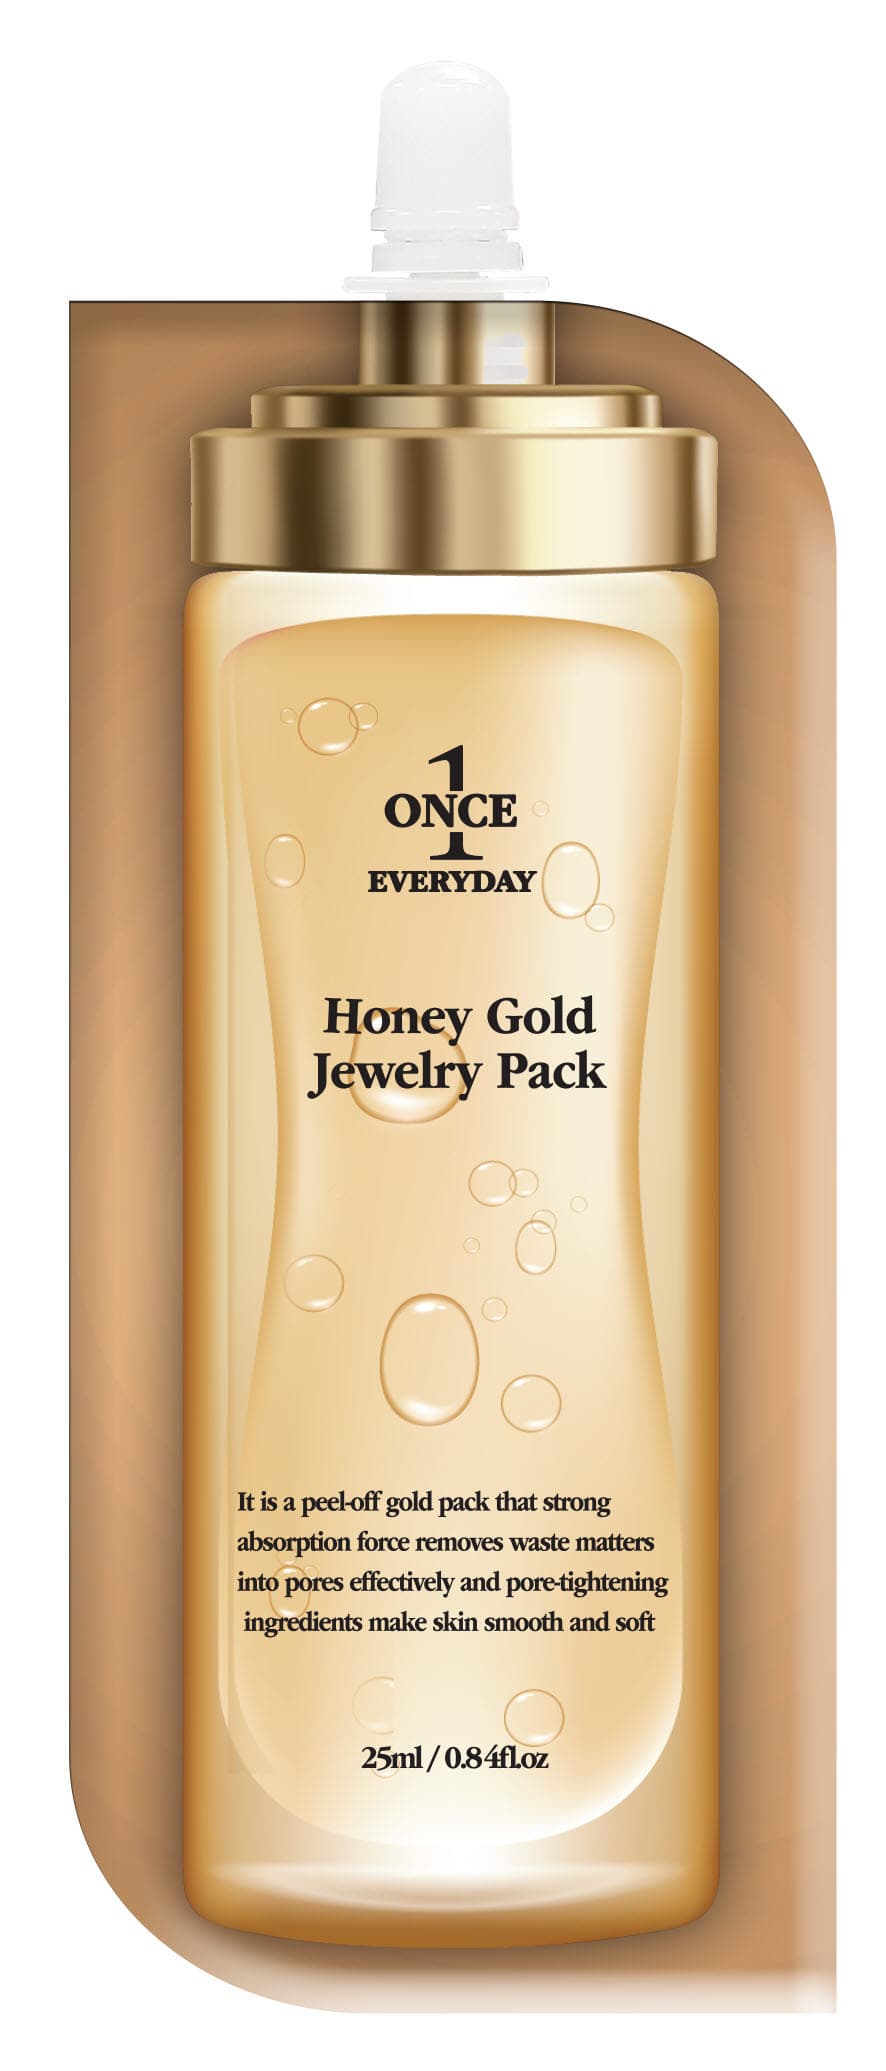 Once Everyday Honey Gold Jewelry Pack